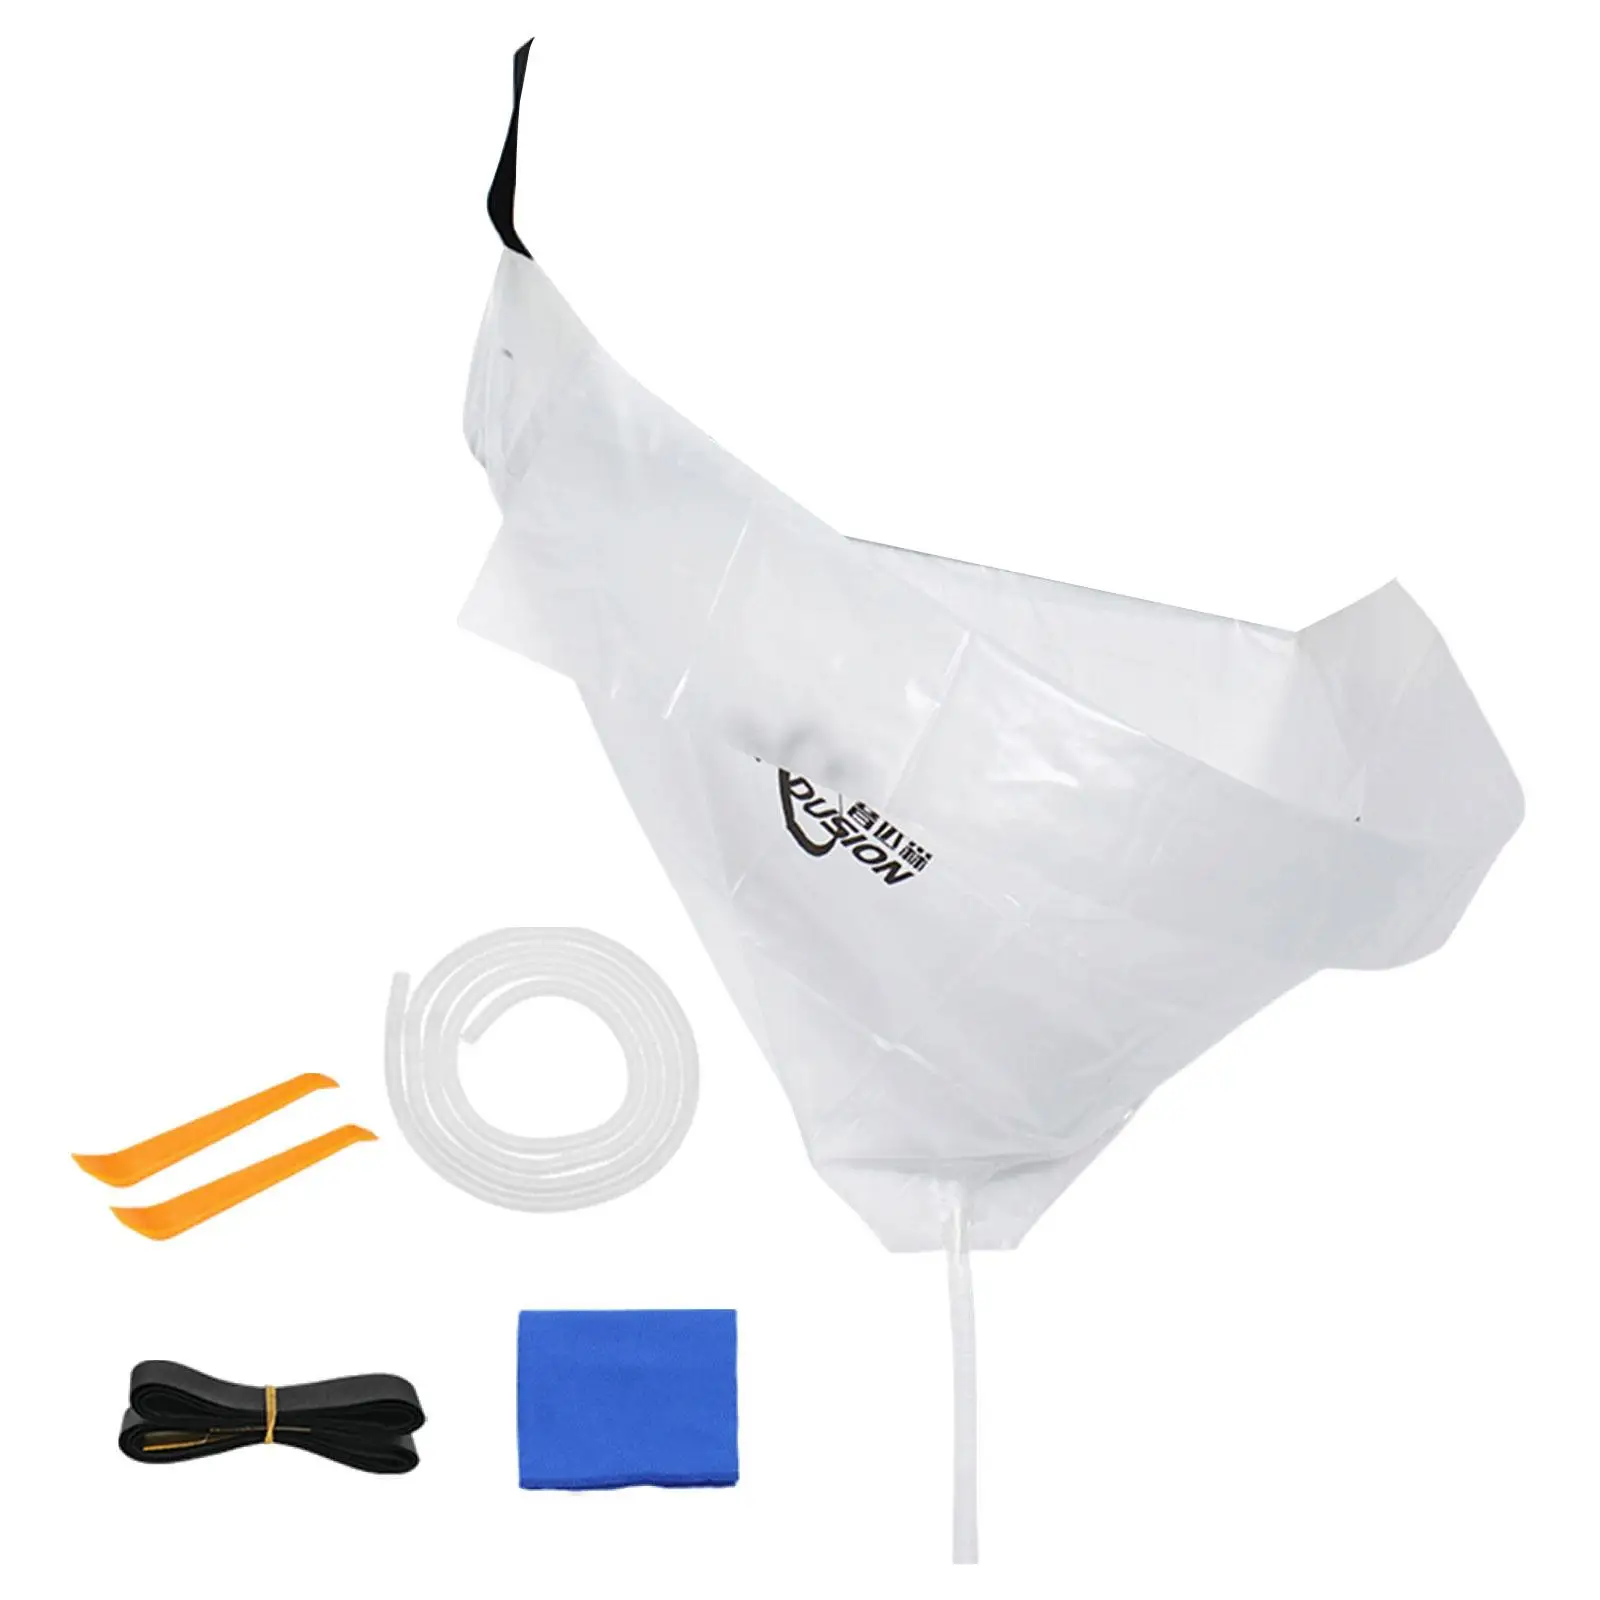 Air Conditioning Cleaning Cover Bag for Wall Mounted Units Waterproof Leakproof Air Conditioning Service Bag for Office